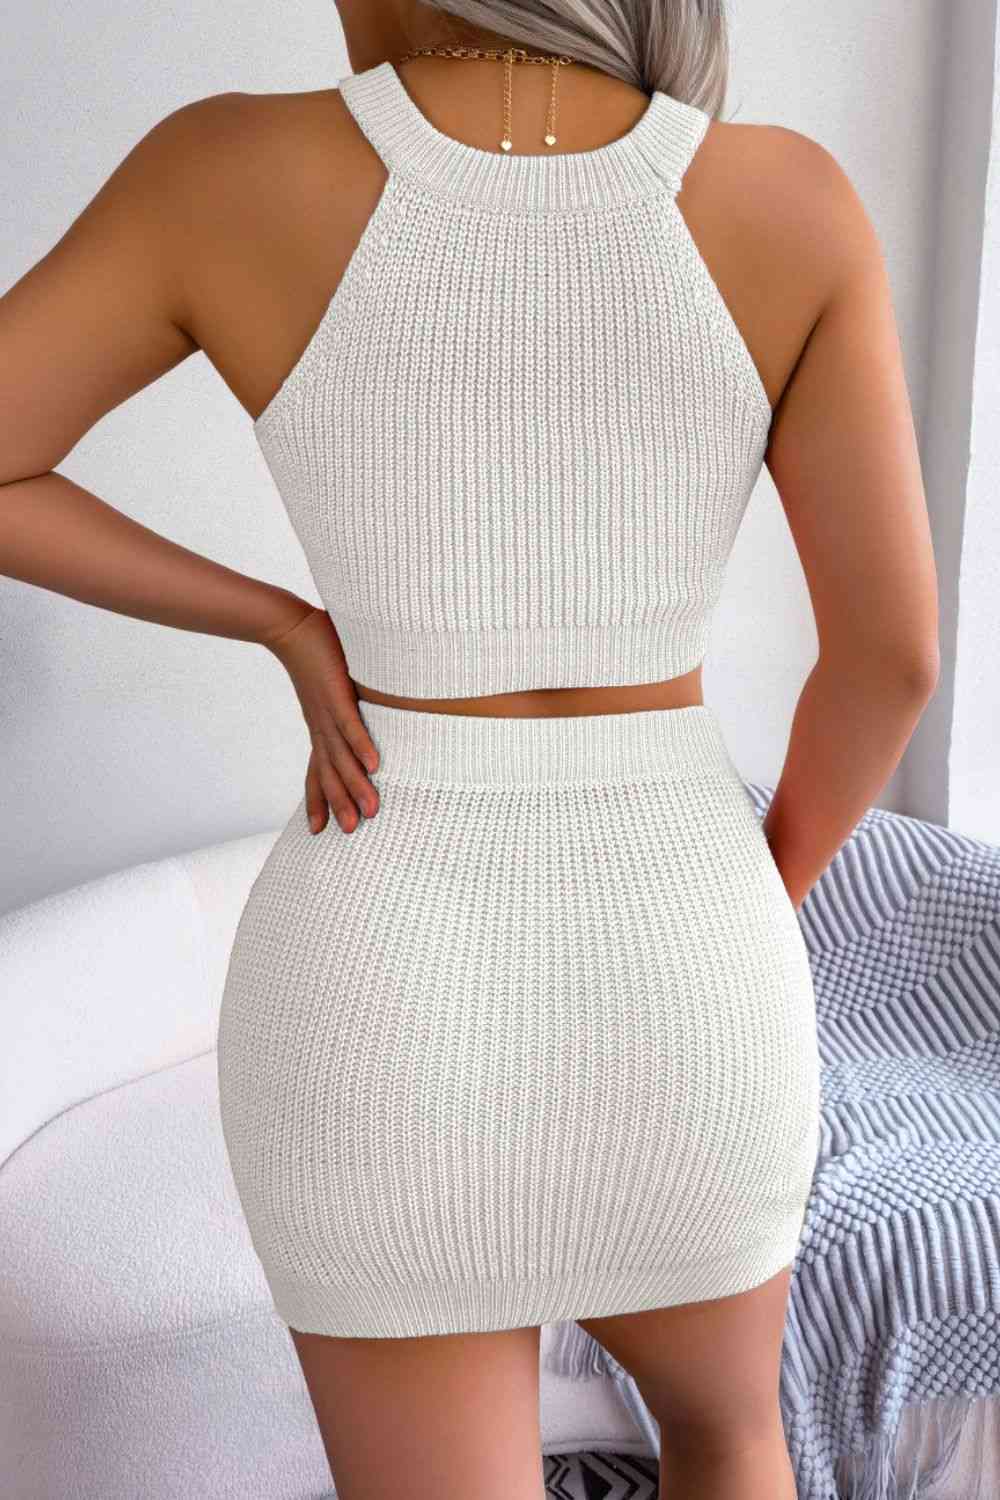 Women's Contrast Ribbed Sleeveless Knit Top and Skirt Set